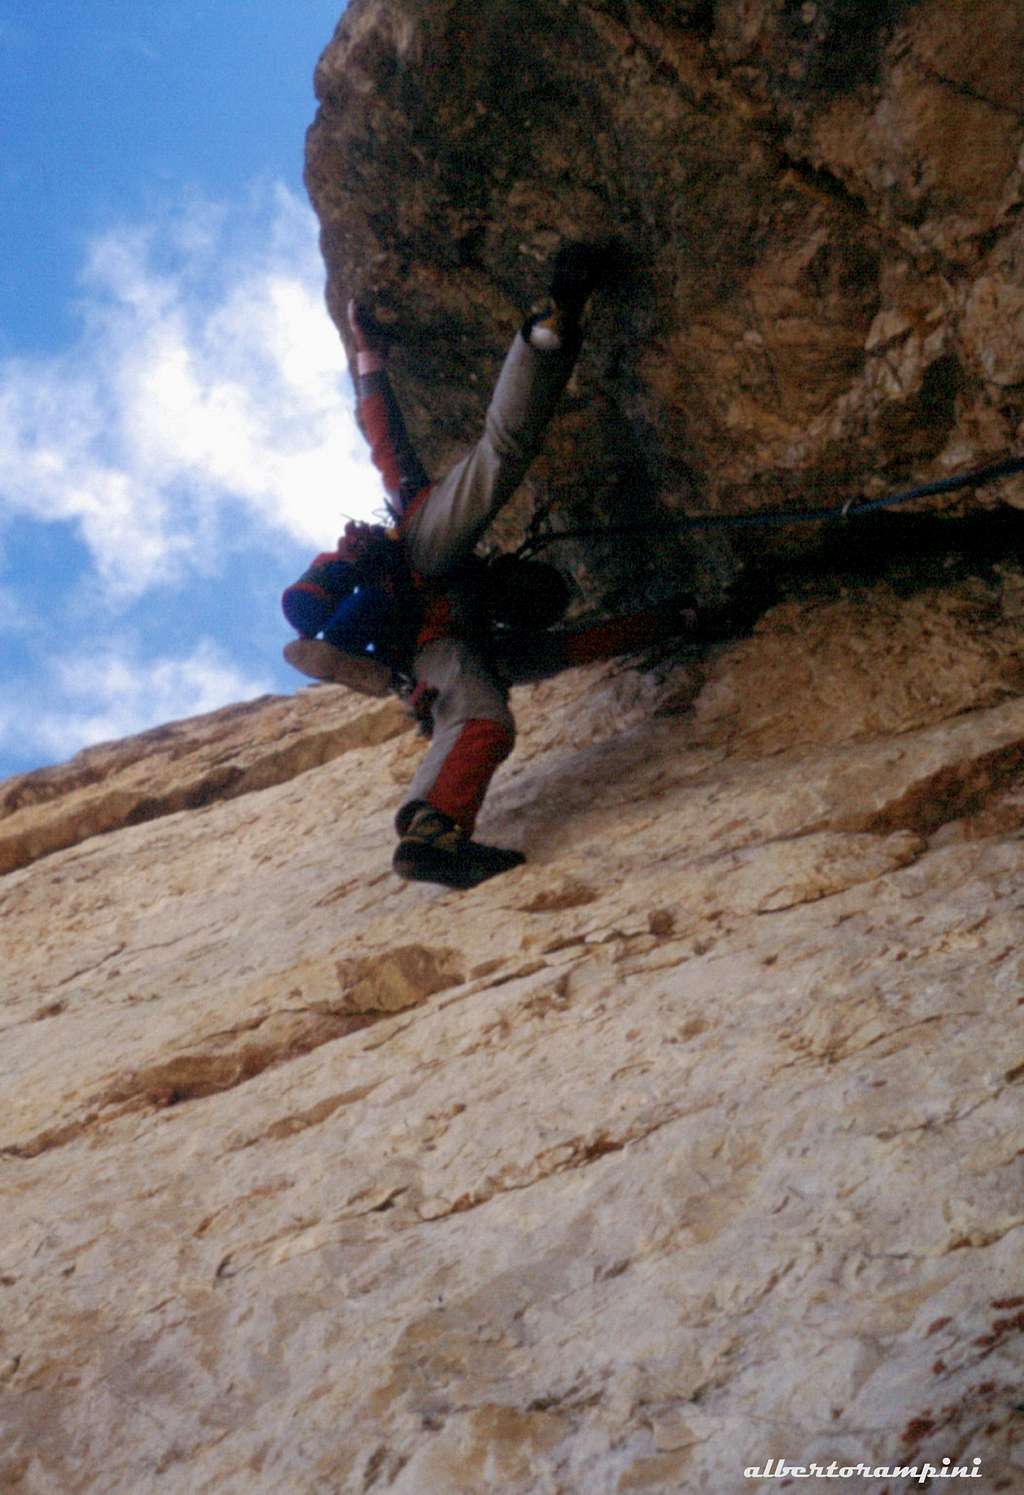 Negotiating an overhang on Diedro Mayerl, Sass dla Crusc